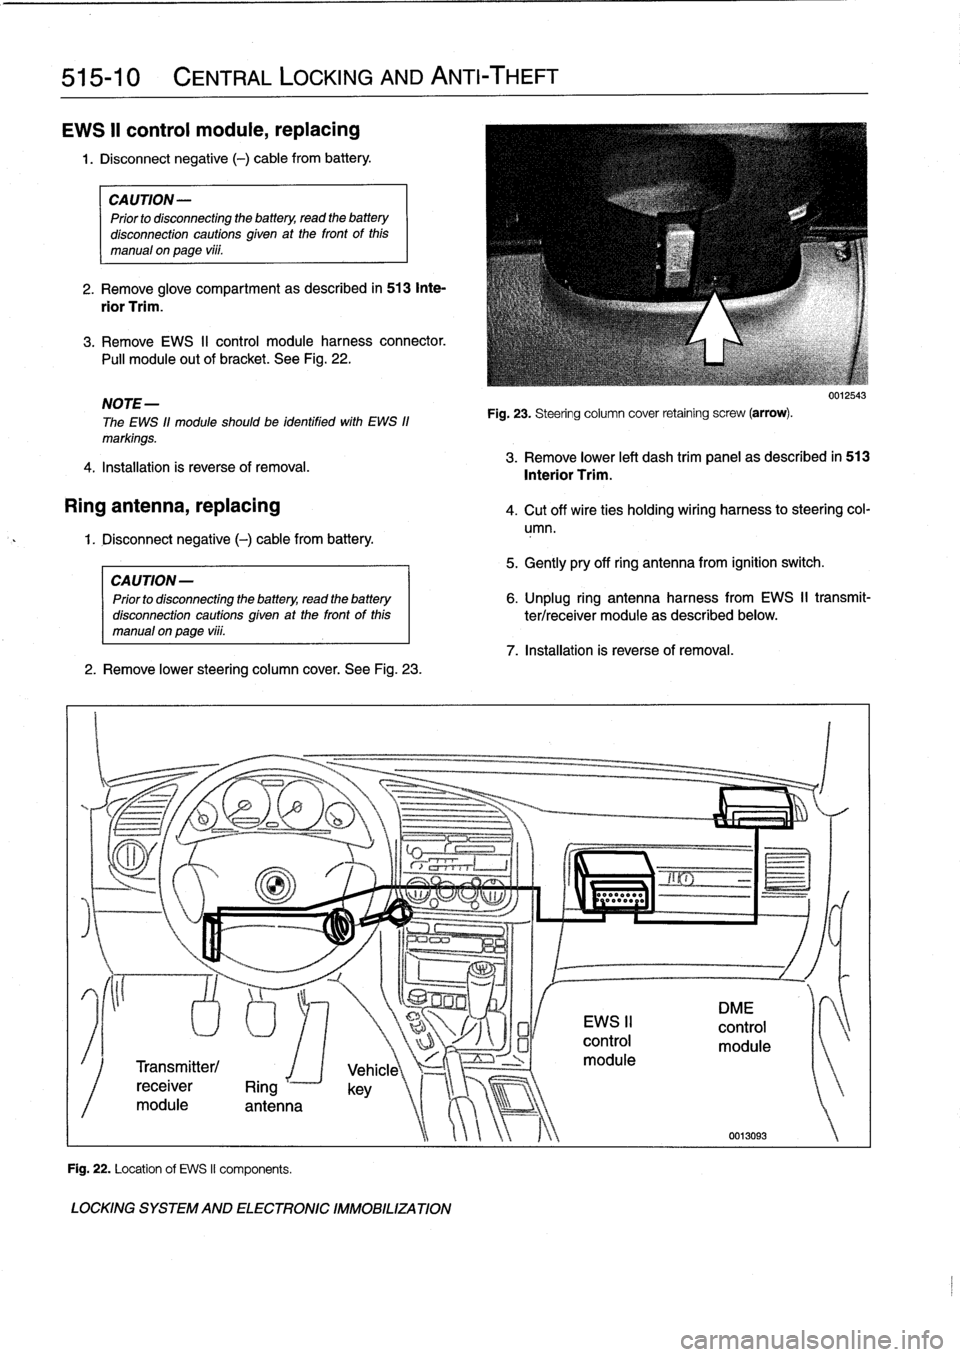 BMW M3 1996 E36 Workshop Manual 
515-10

	

CENTRAL
LOCKING
AND
ANTI-THEFT

EWS
II
control
module,
replacing

1
.
Disconnect
negative
(-)
cable
from
battery
.

CAUTION-

Prior
to
disconnecting
the
battery,
read
the
battery

disconne